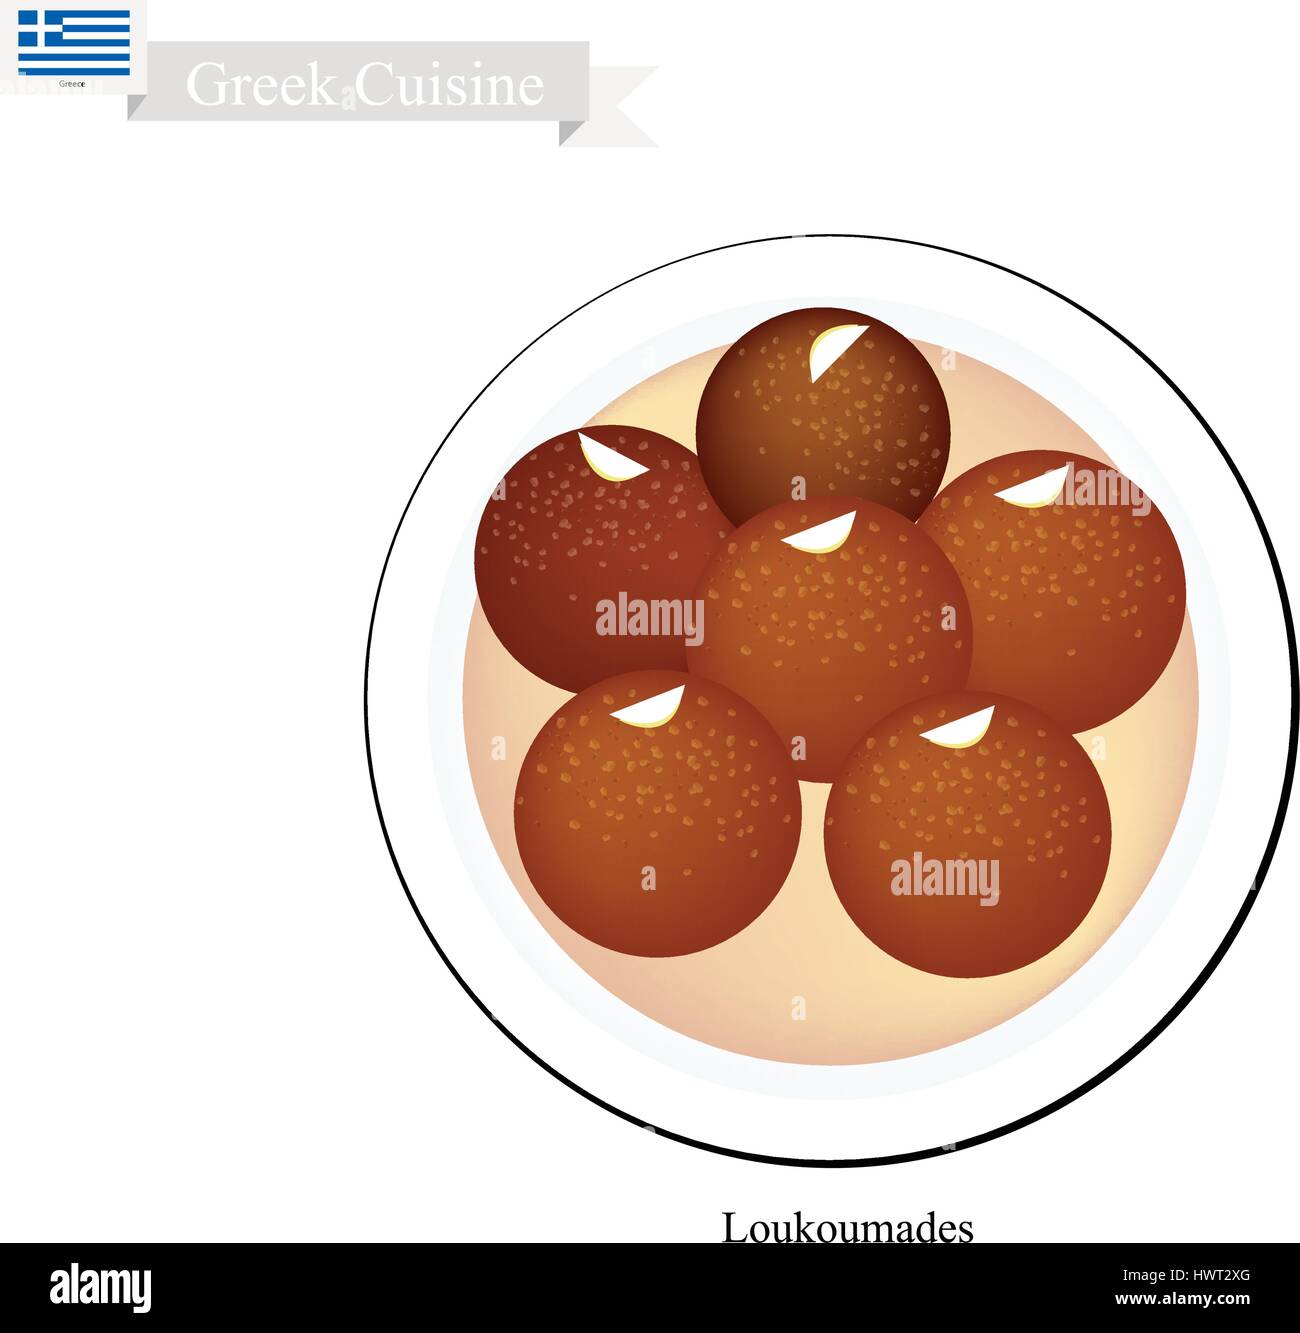 Greek Cuisine, Loukoumades or Traditional Dessert Balls Topping with Syrup and Almond. One of Most Popular Desserts in Greece. Stock Vector